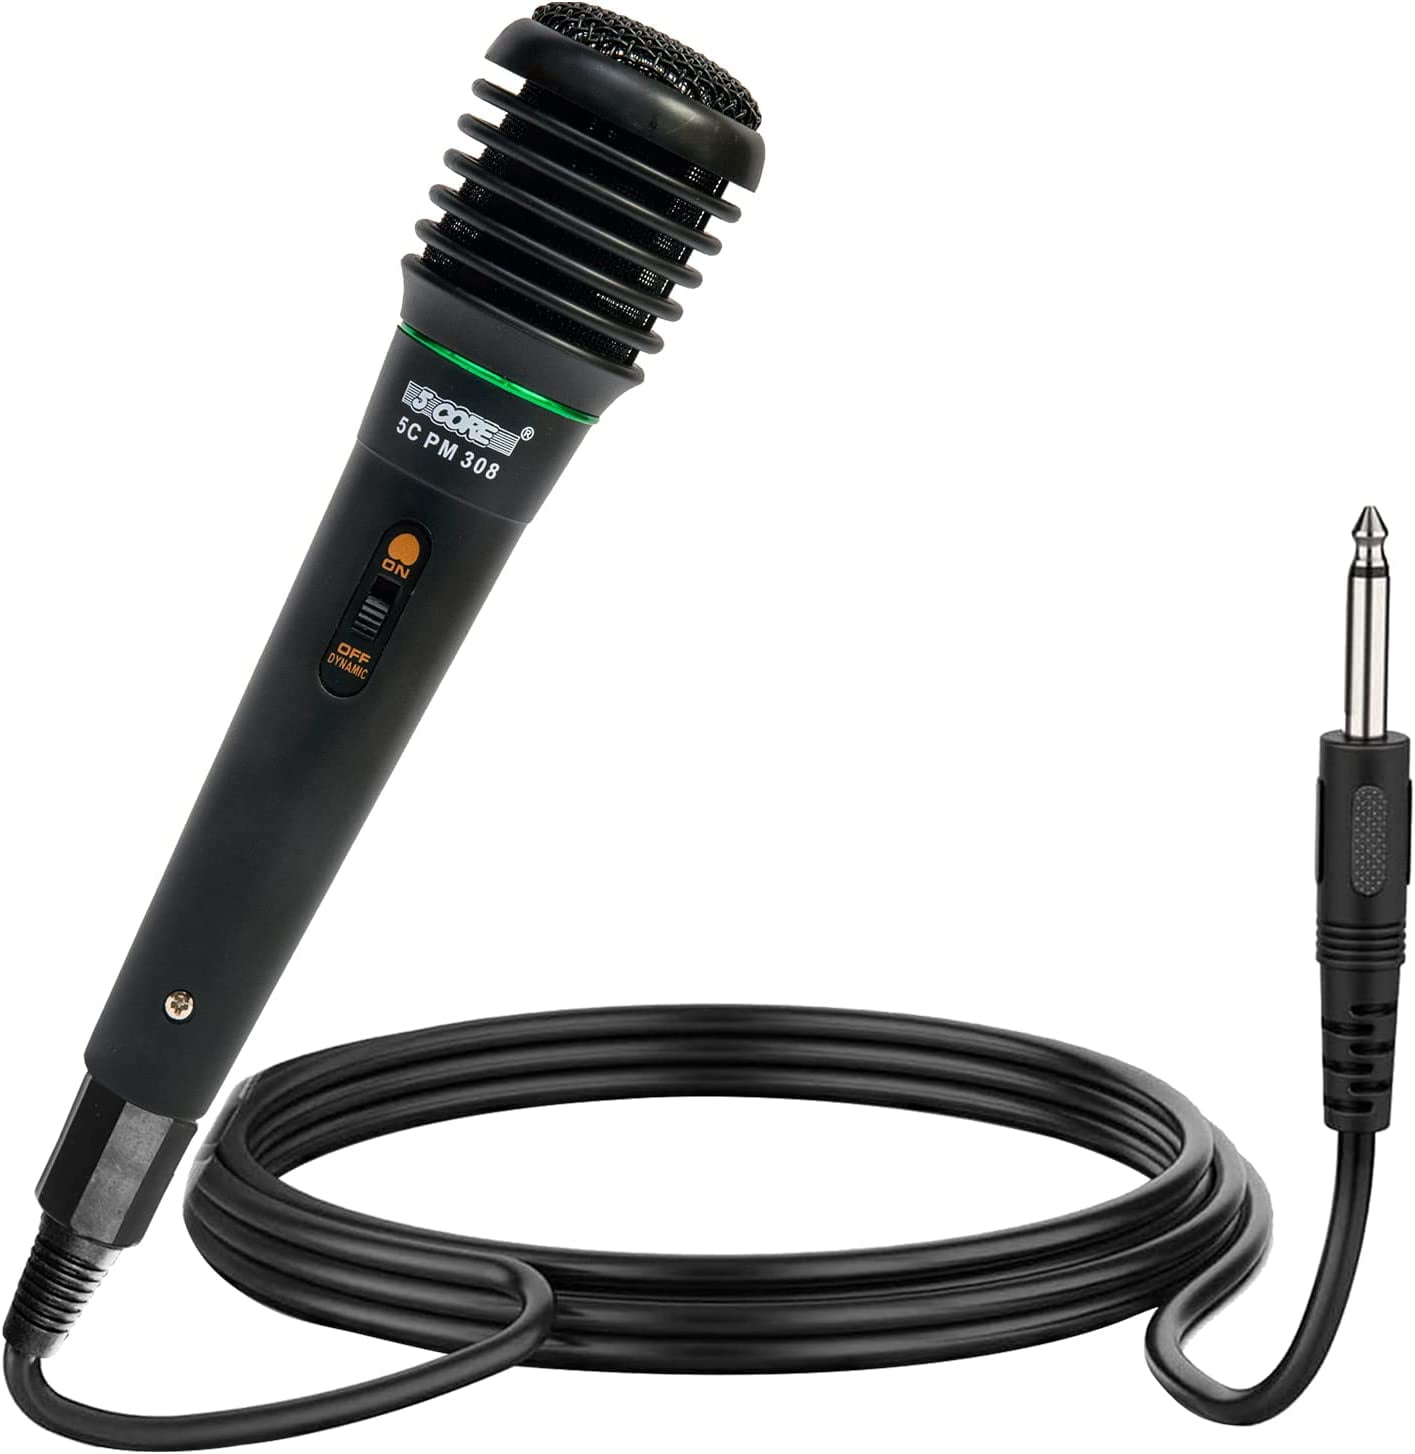  TONOR Dynamic Karaoke Microphone for Singing with 5M XLR Cable,  Metal Handheld Mic Compatible with Karaoke Machine/Speaker/Amp/Mixer for  Karaoke Singing, Speech, Wedding and Outdoor Activity : Musical Instruments